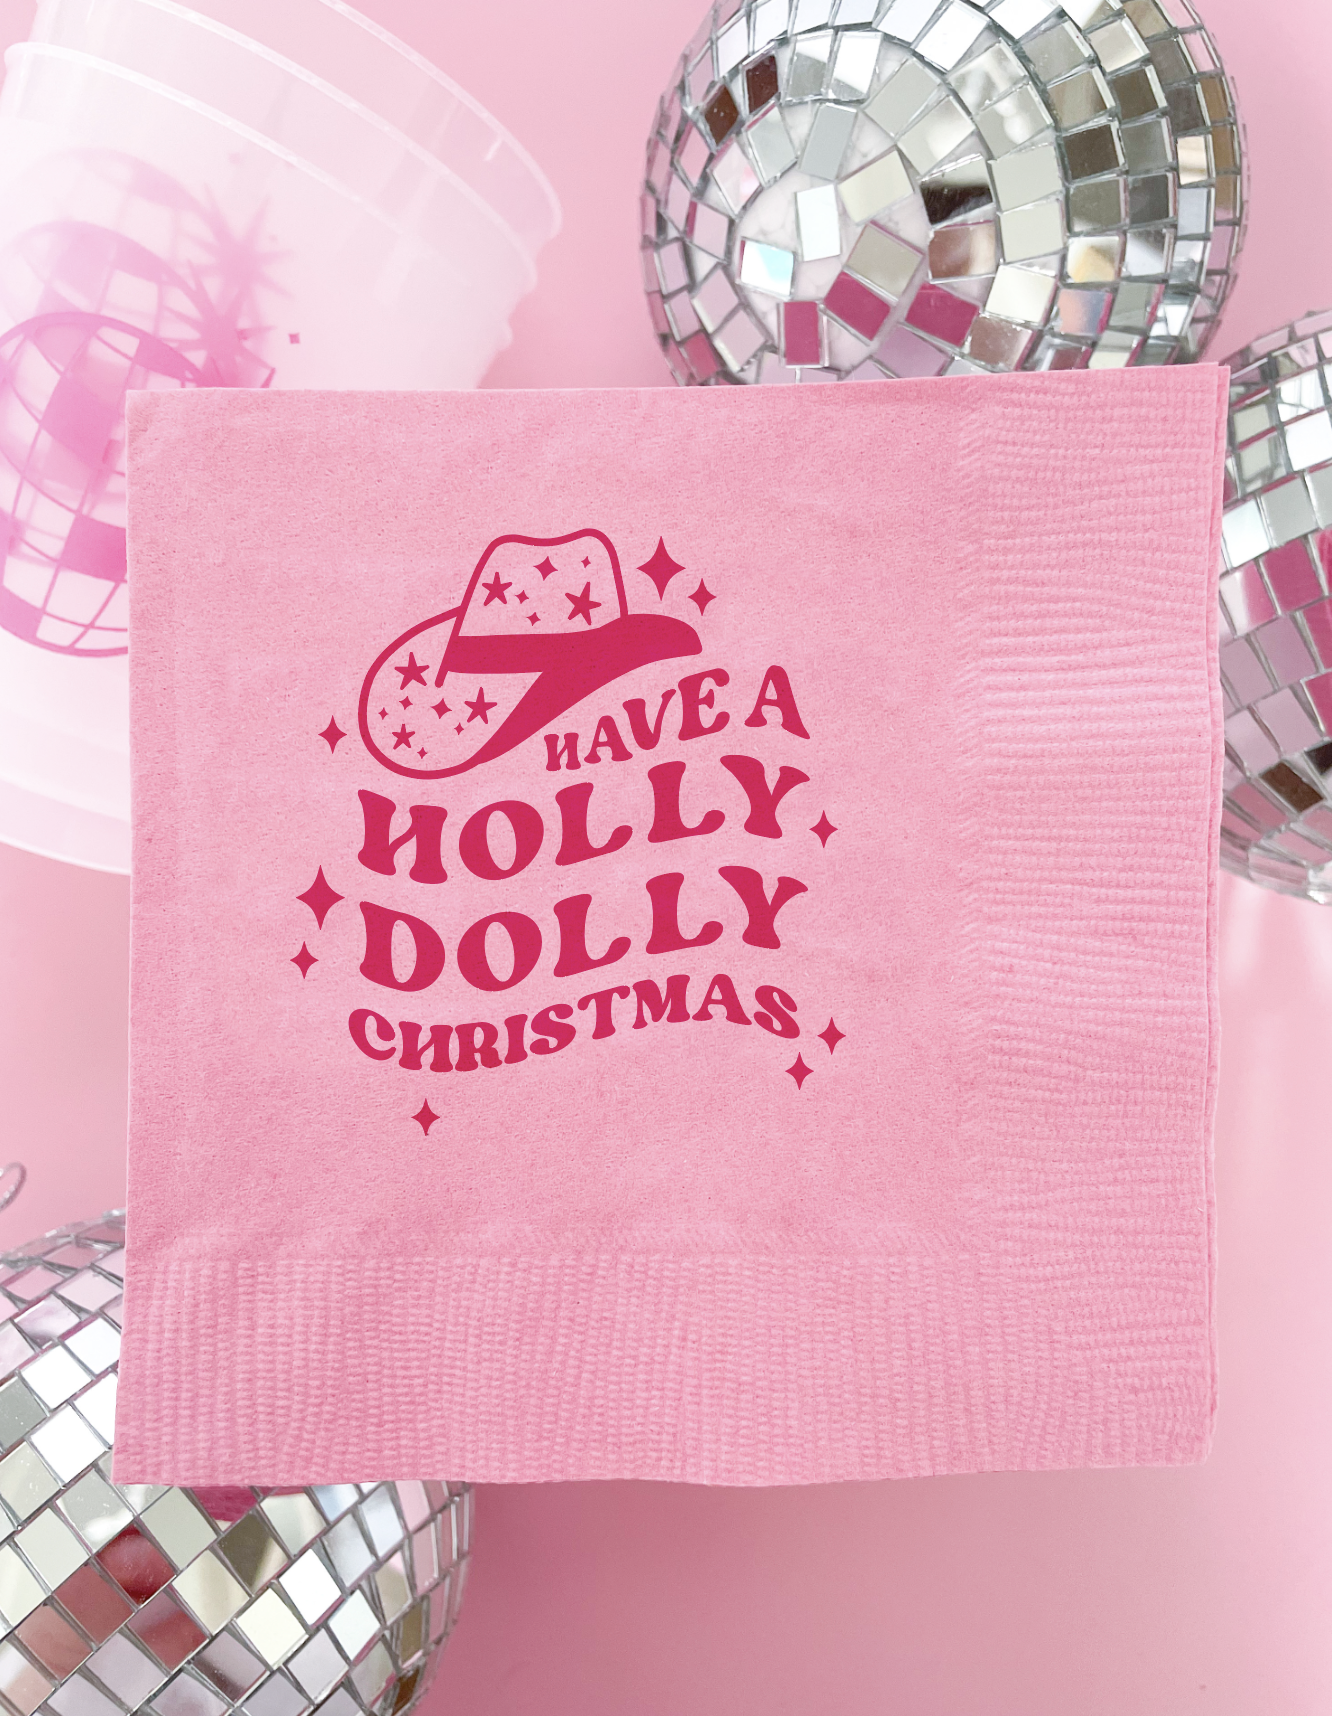 Cocktail Napkins: Cowgirl Holly Dolly Christmas